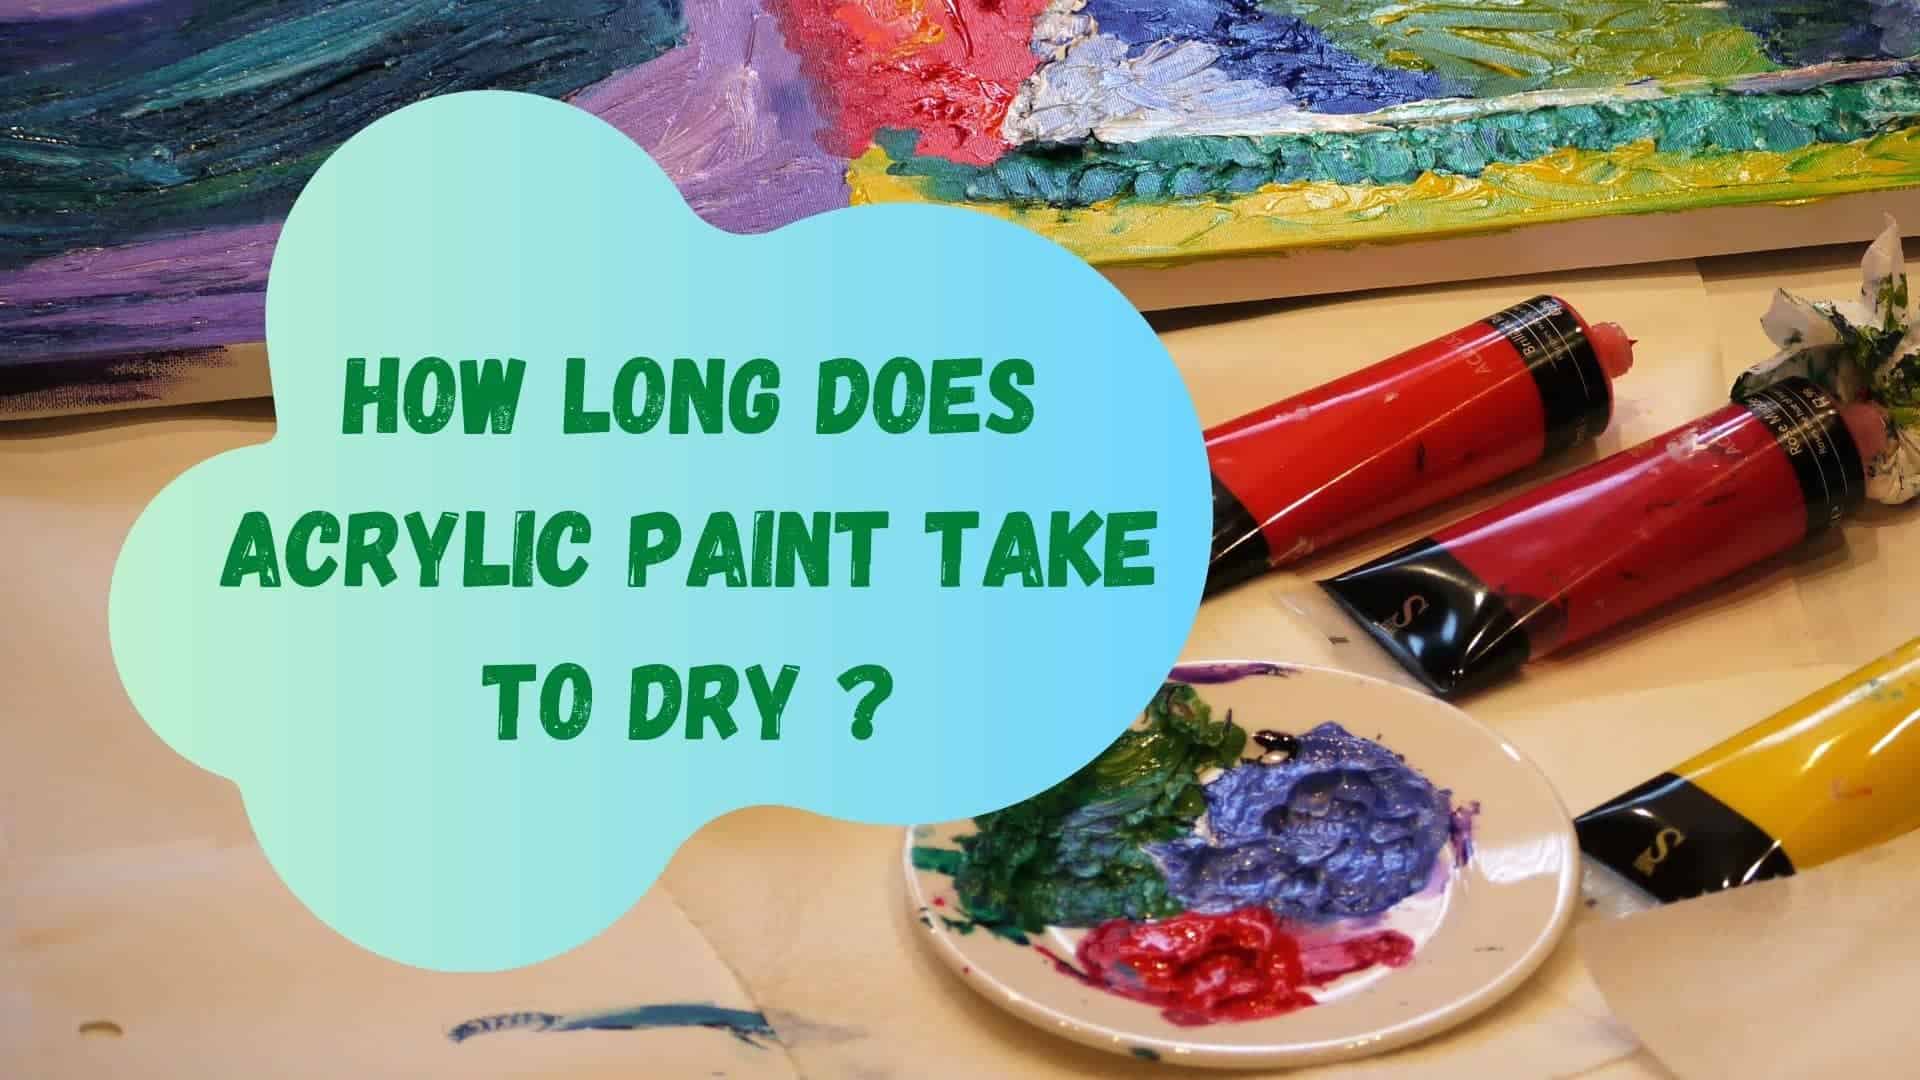 How Long Does Acrylic Paint Take To Dry